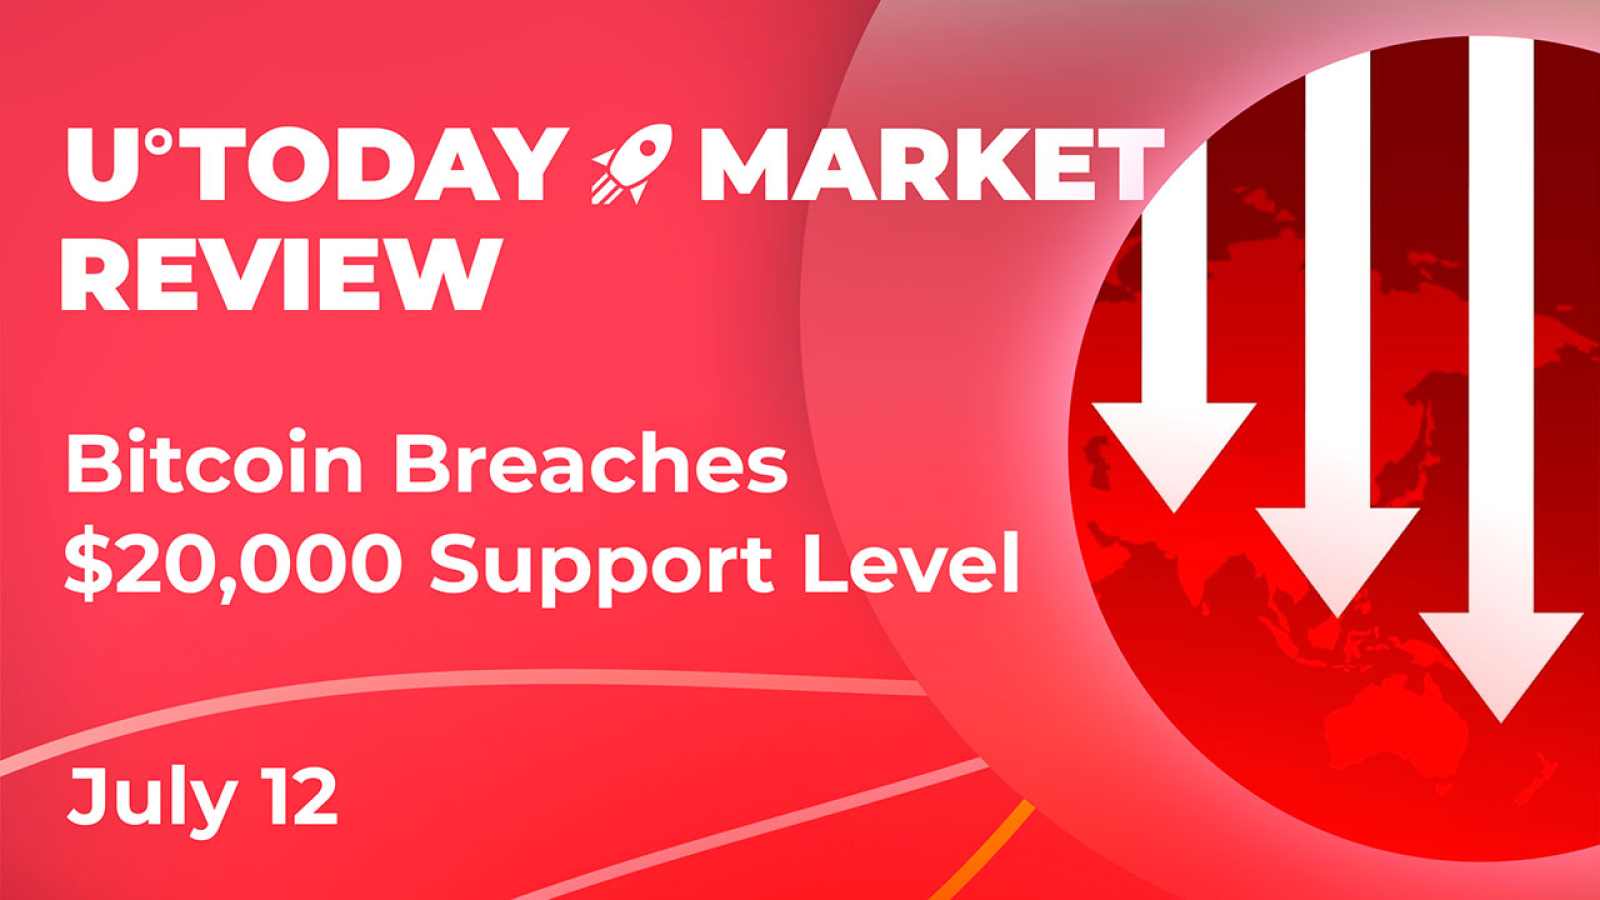 Bitcoin $20,000 Support Breached, But There Are 3 More Important Levels to Watch: Crypto Market Review, July 12